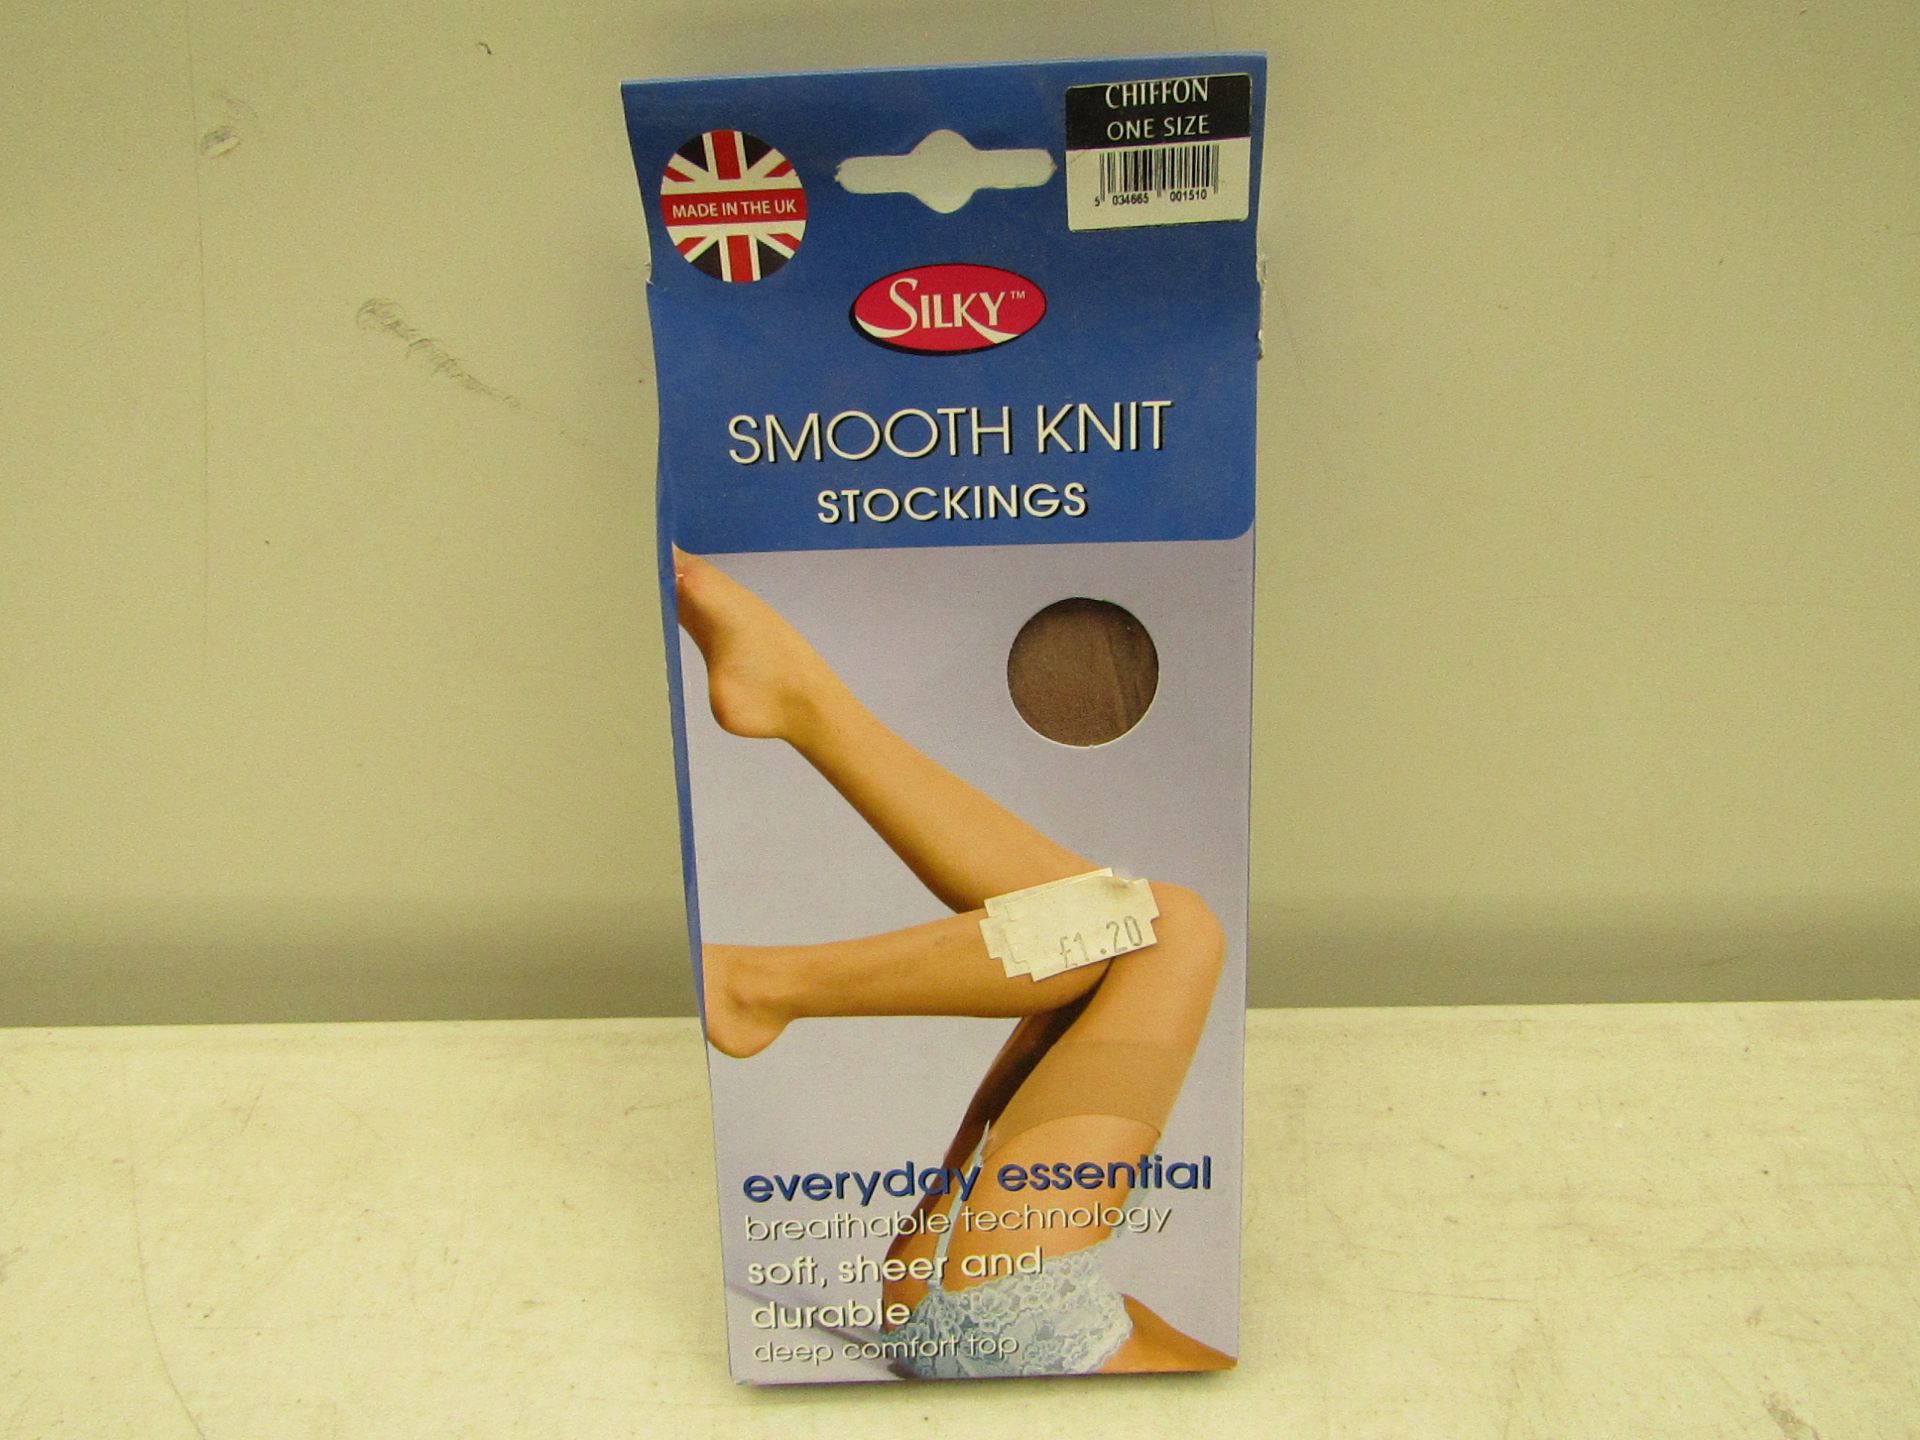 5x Silky smooth knit stockings, new and packaged.